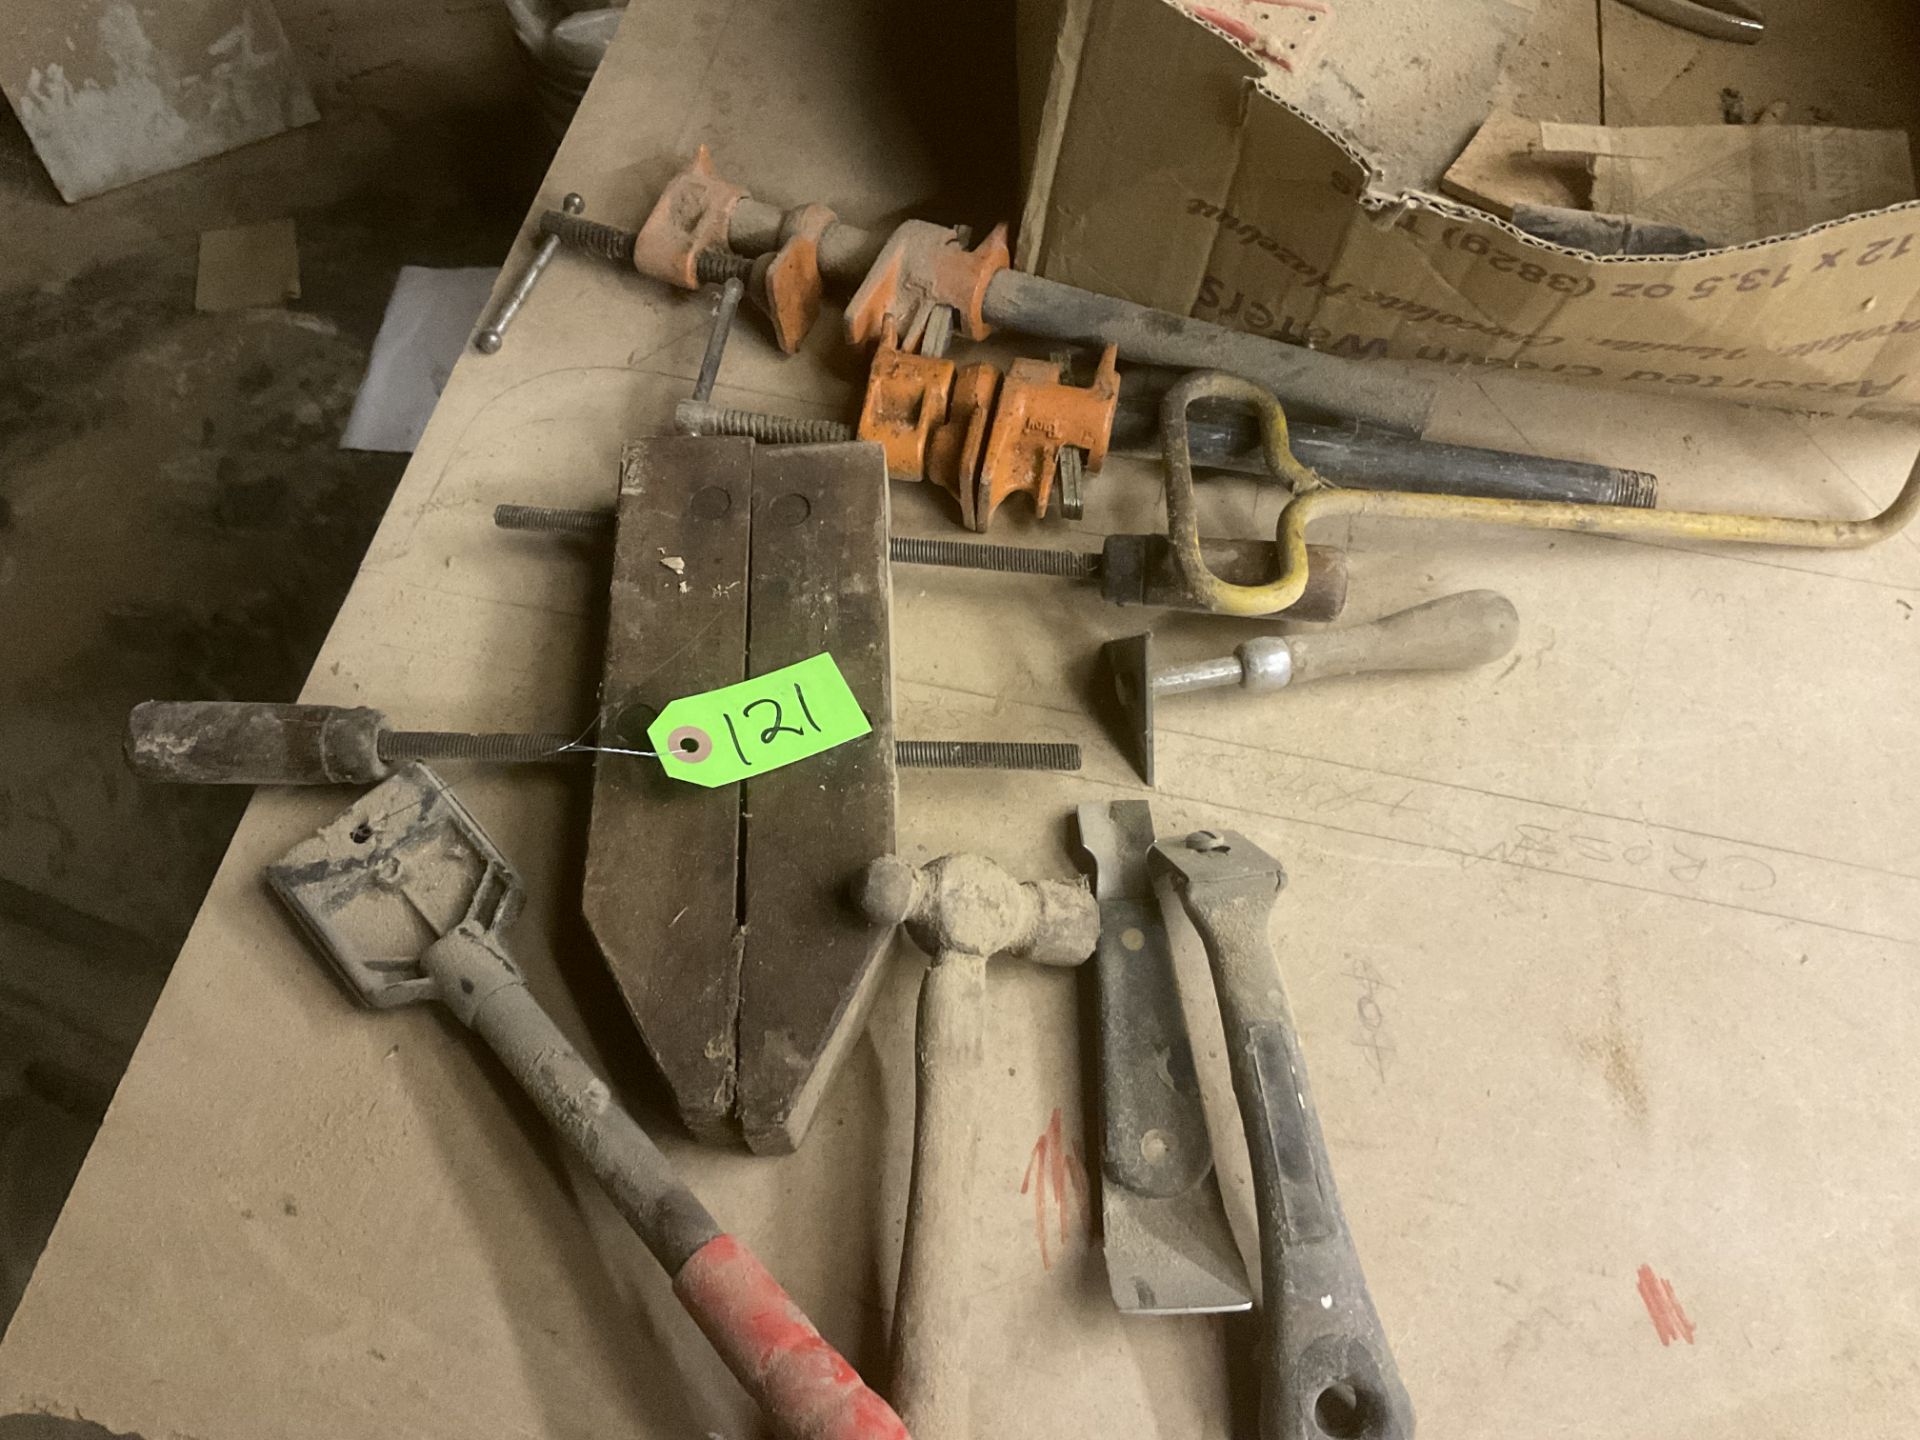 Various wood clamps and scrapers